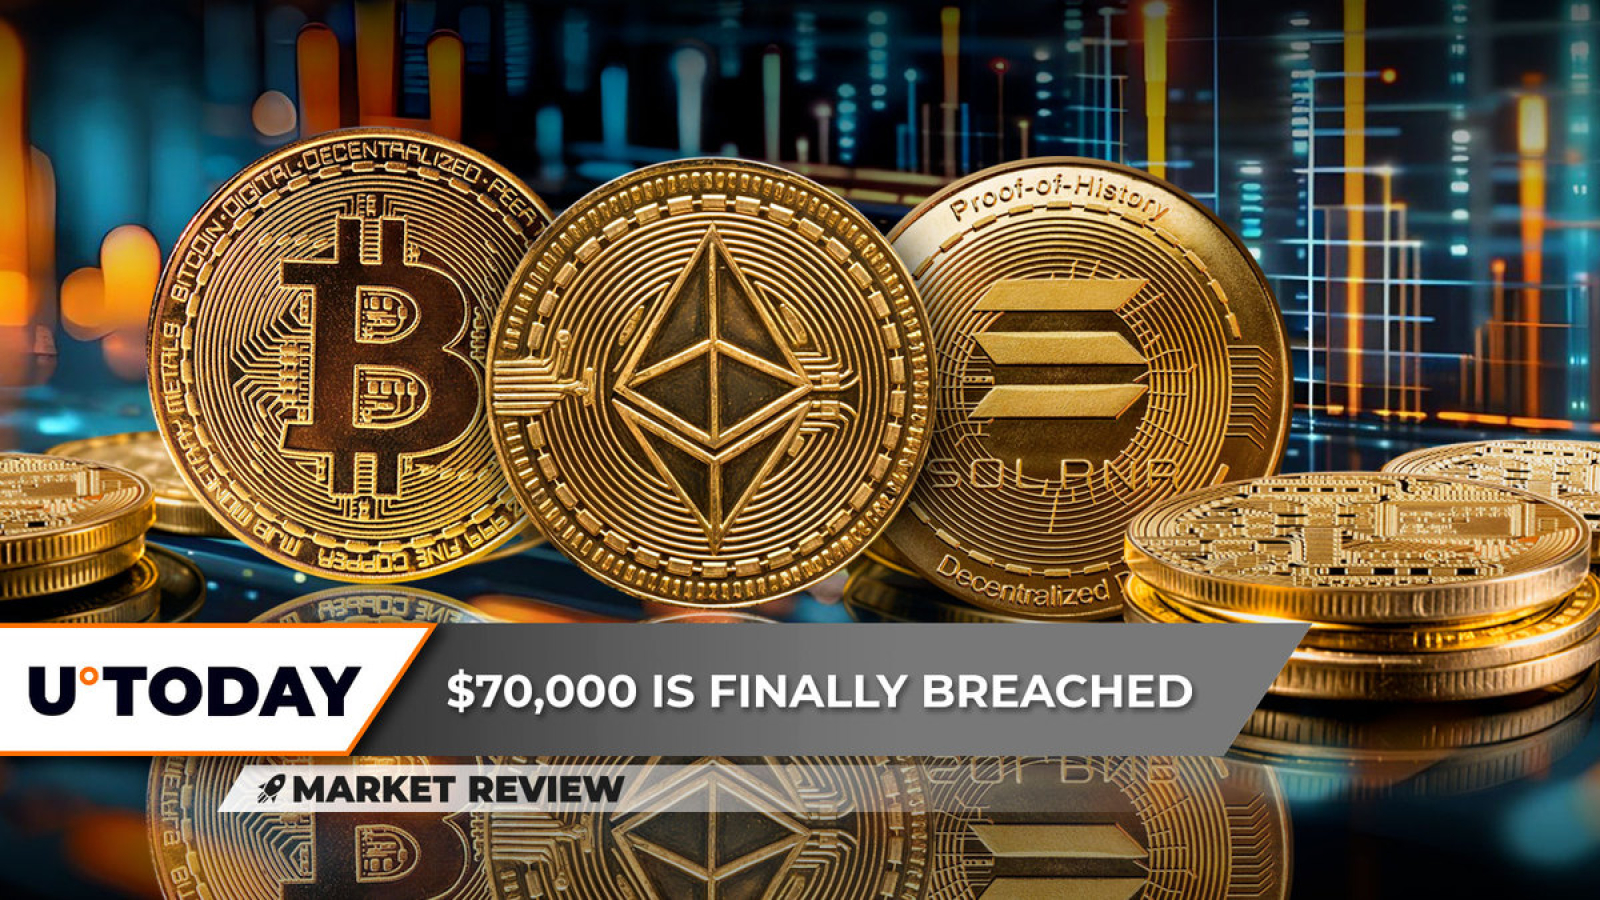 Bitcoin (BTC) on Verge of Hitting $71,000, Ethereum (ETH) Shows Bizarre Activity, Will Solana (SOL) Become Number 1 Again? 